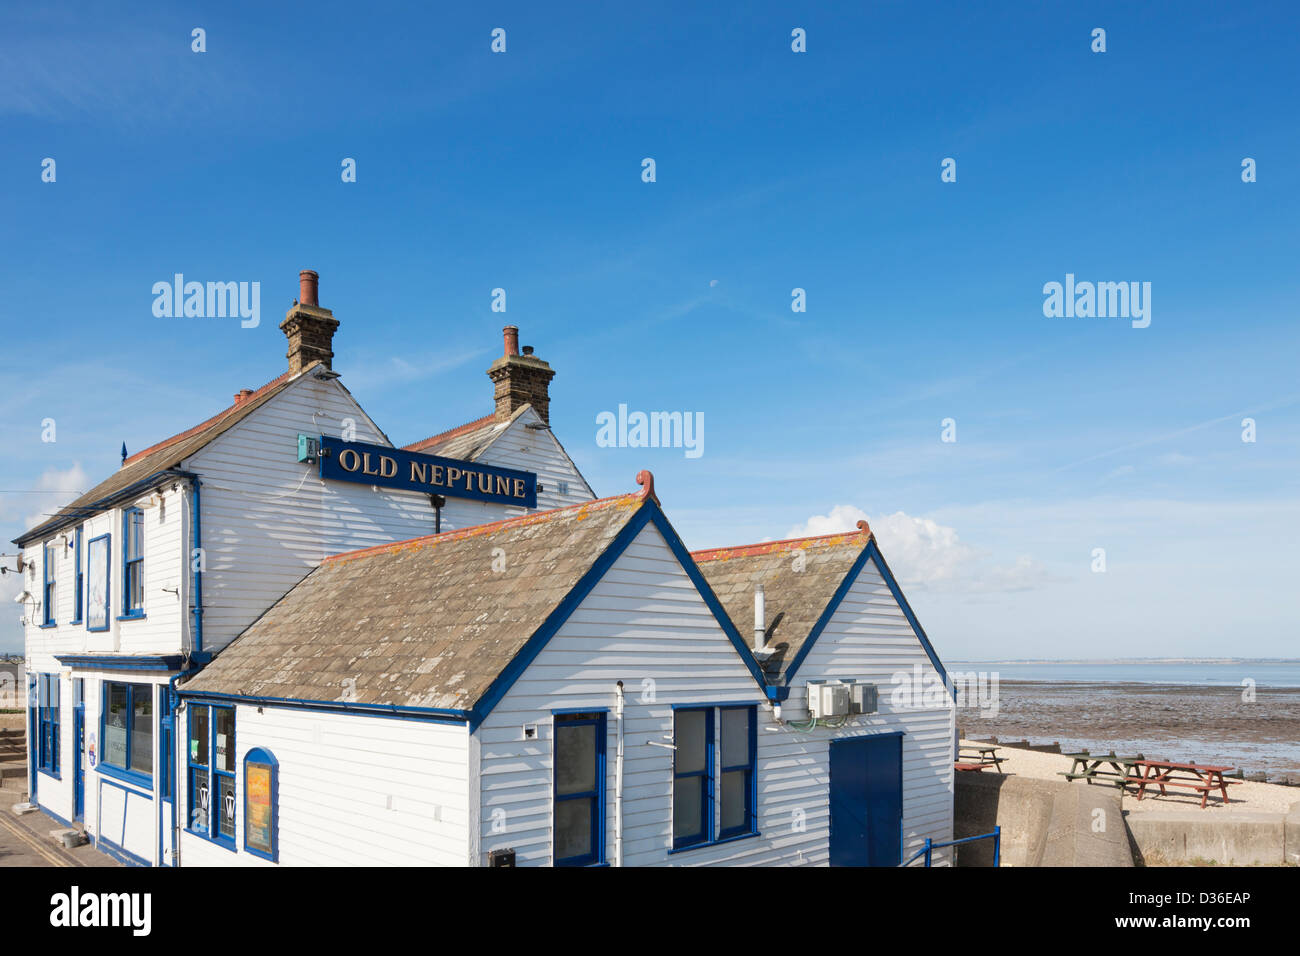 Neptune ancien pub, Whitstable, Kent, Angleterre Banque D'Images